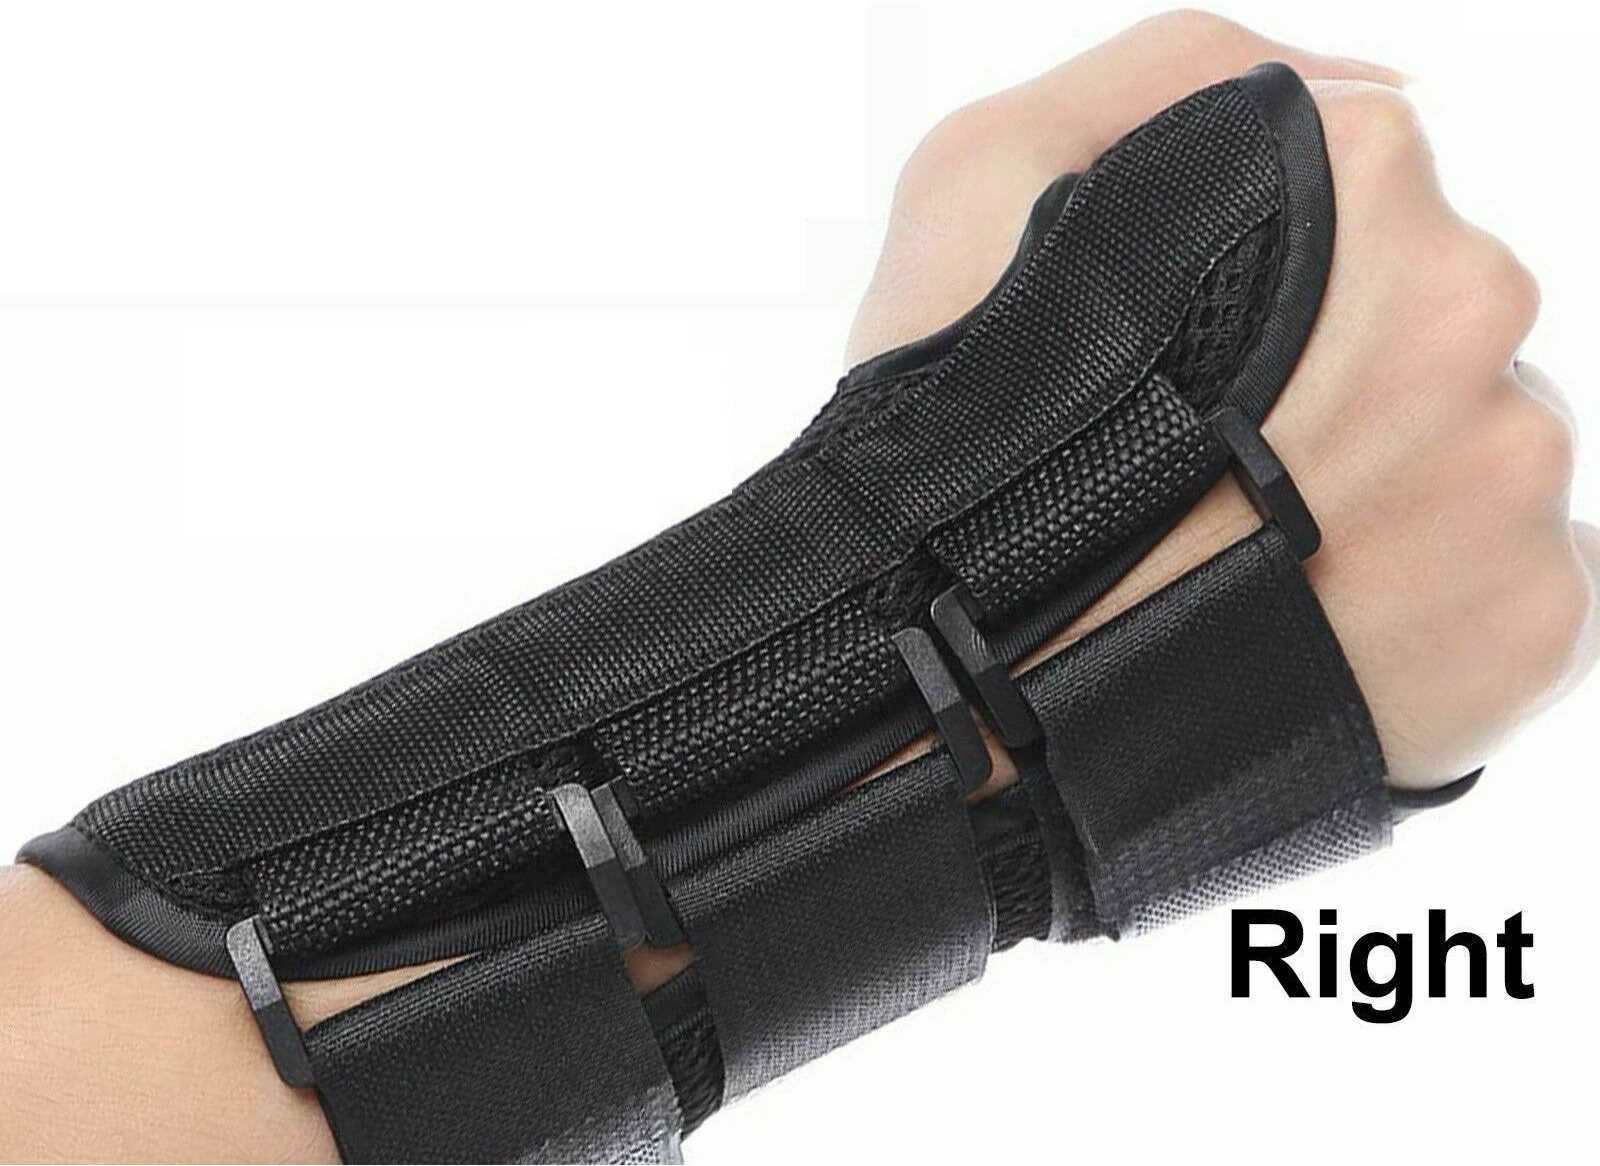 Small Black Right Hand Adjustable Wrist Support Brace Carpal Tunnel Fractures Splint